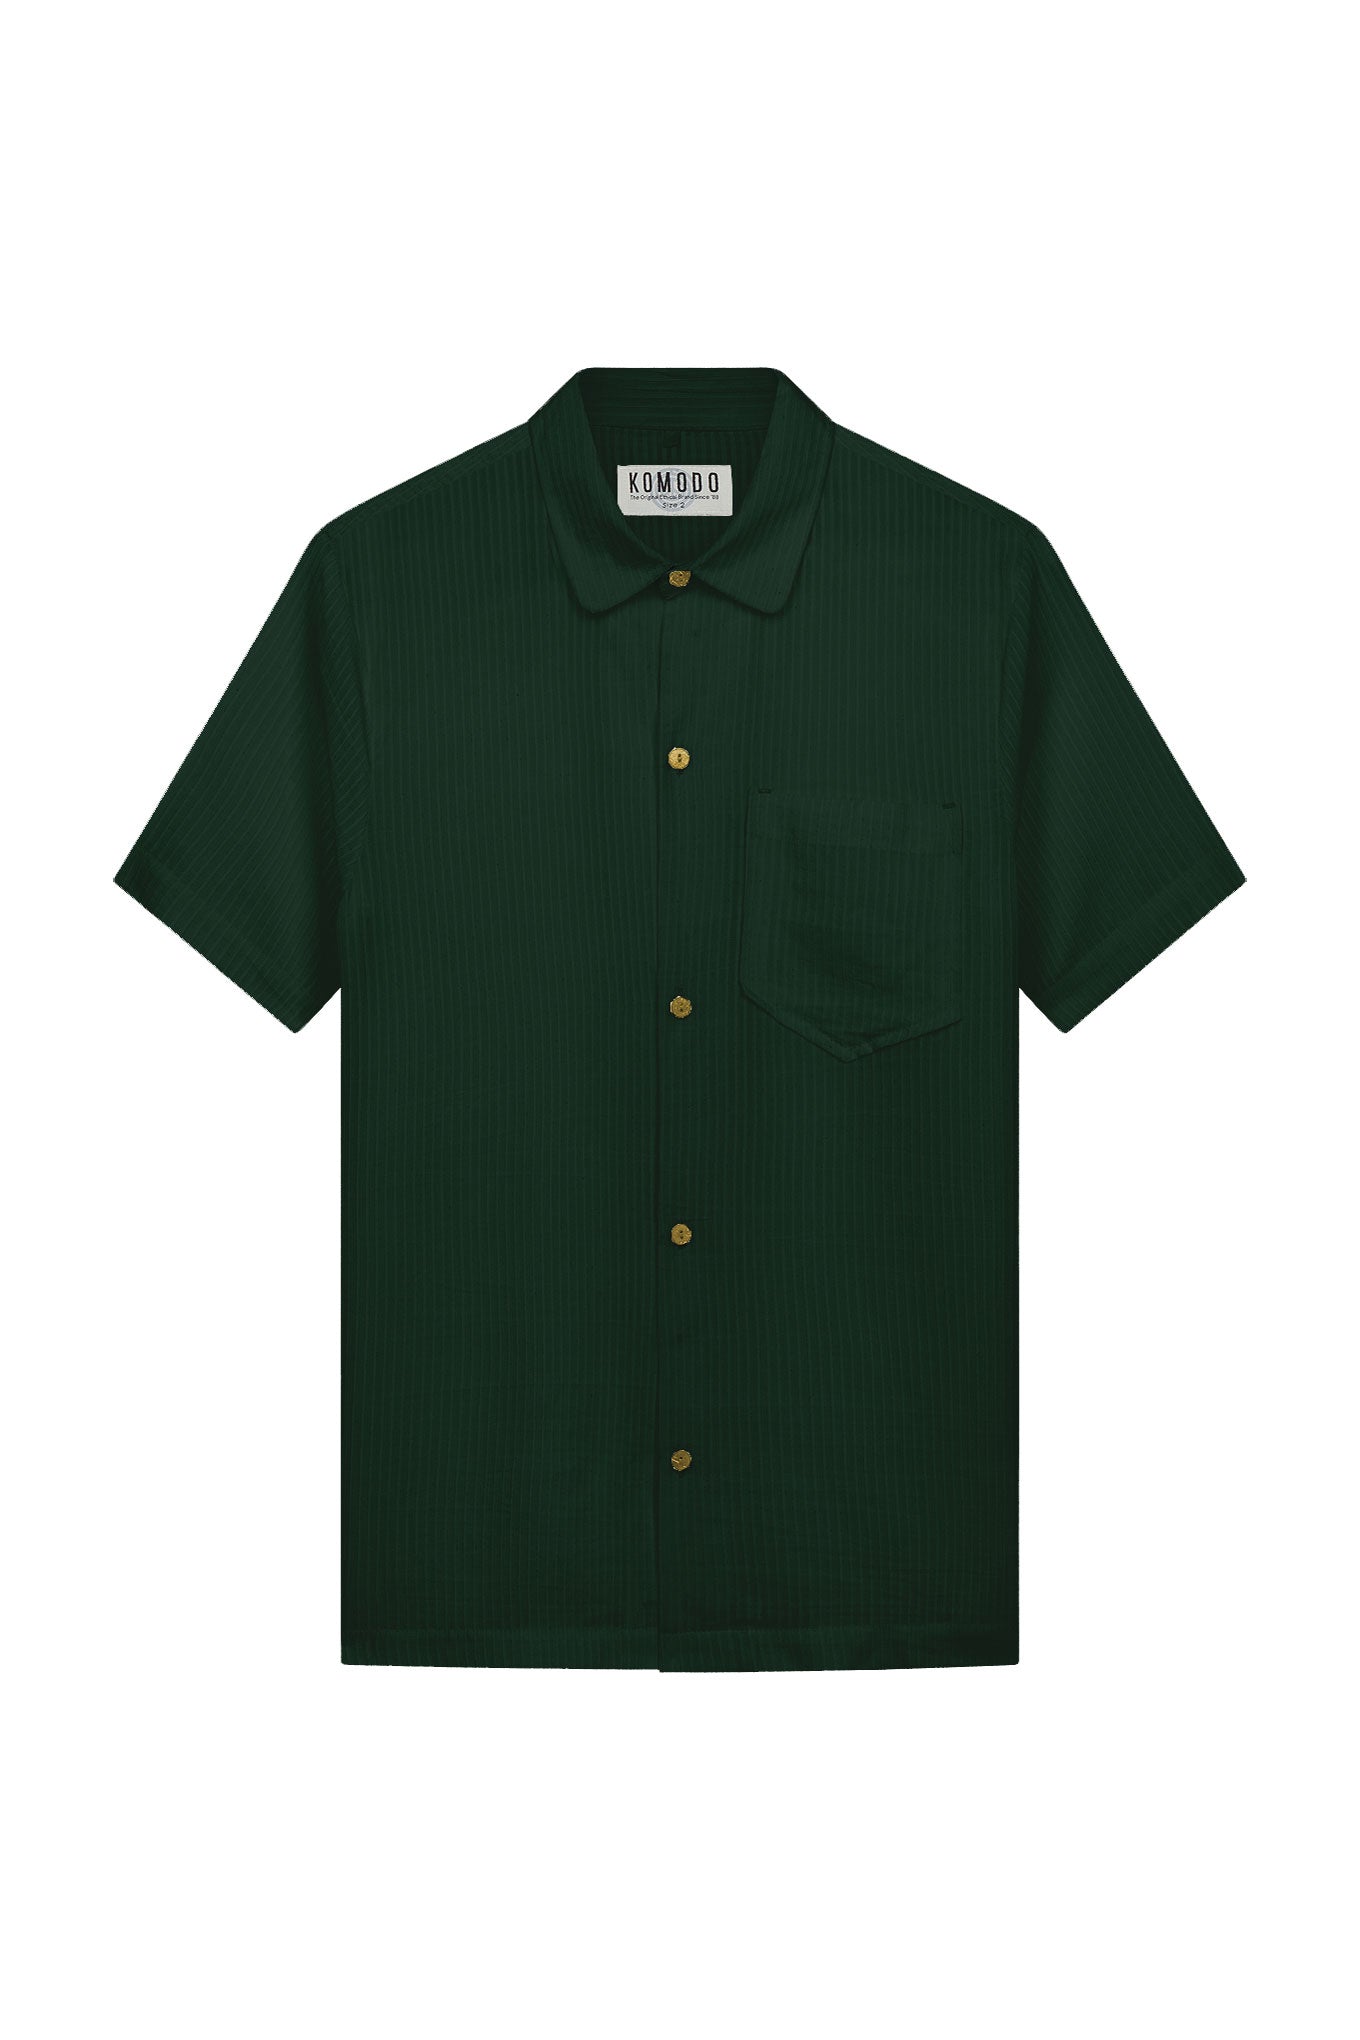 SPINDRIFT Corn Fabric Shirt - Forest Green, Extra-Large